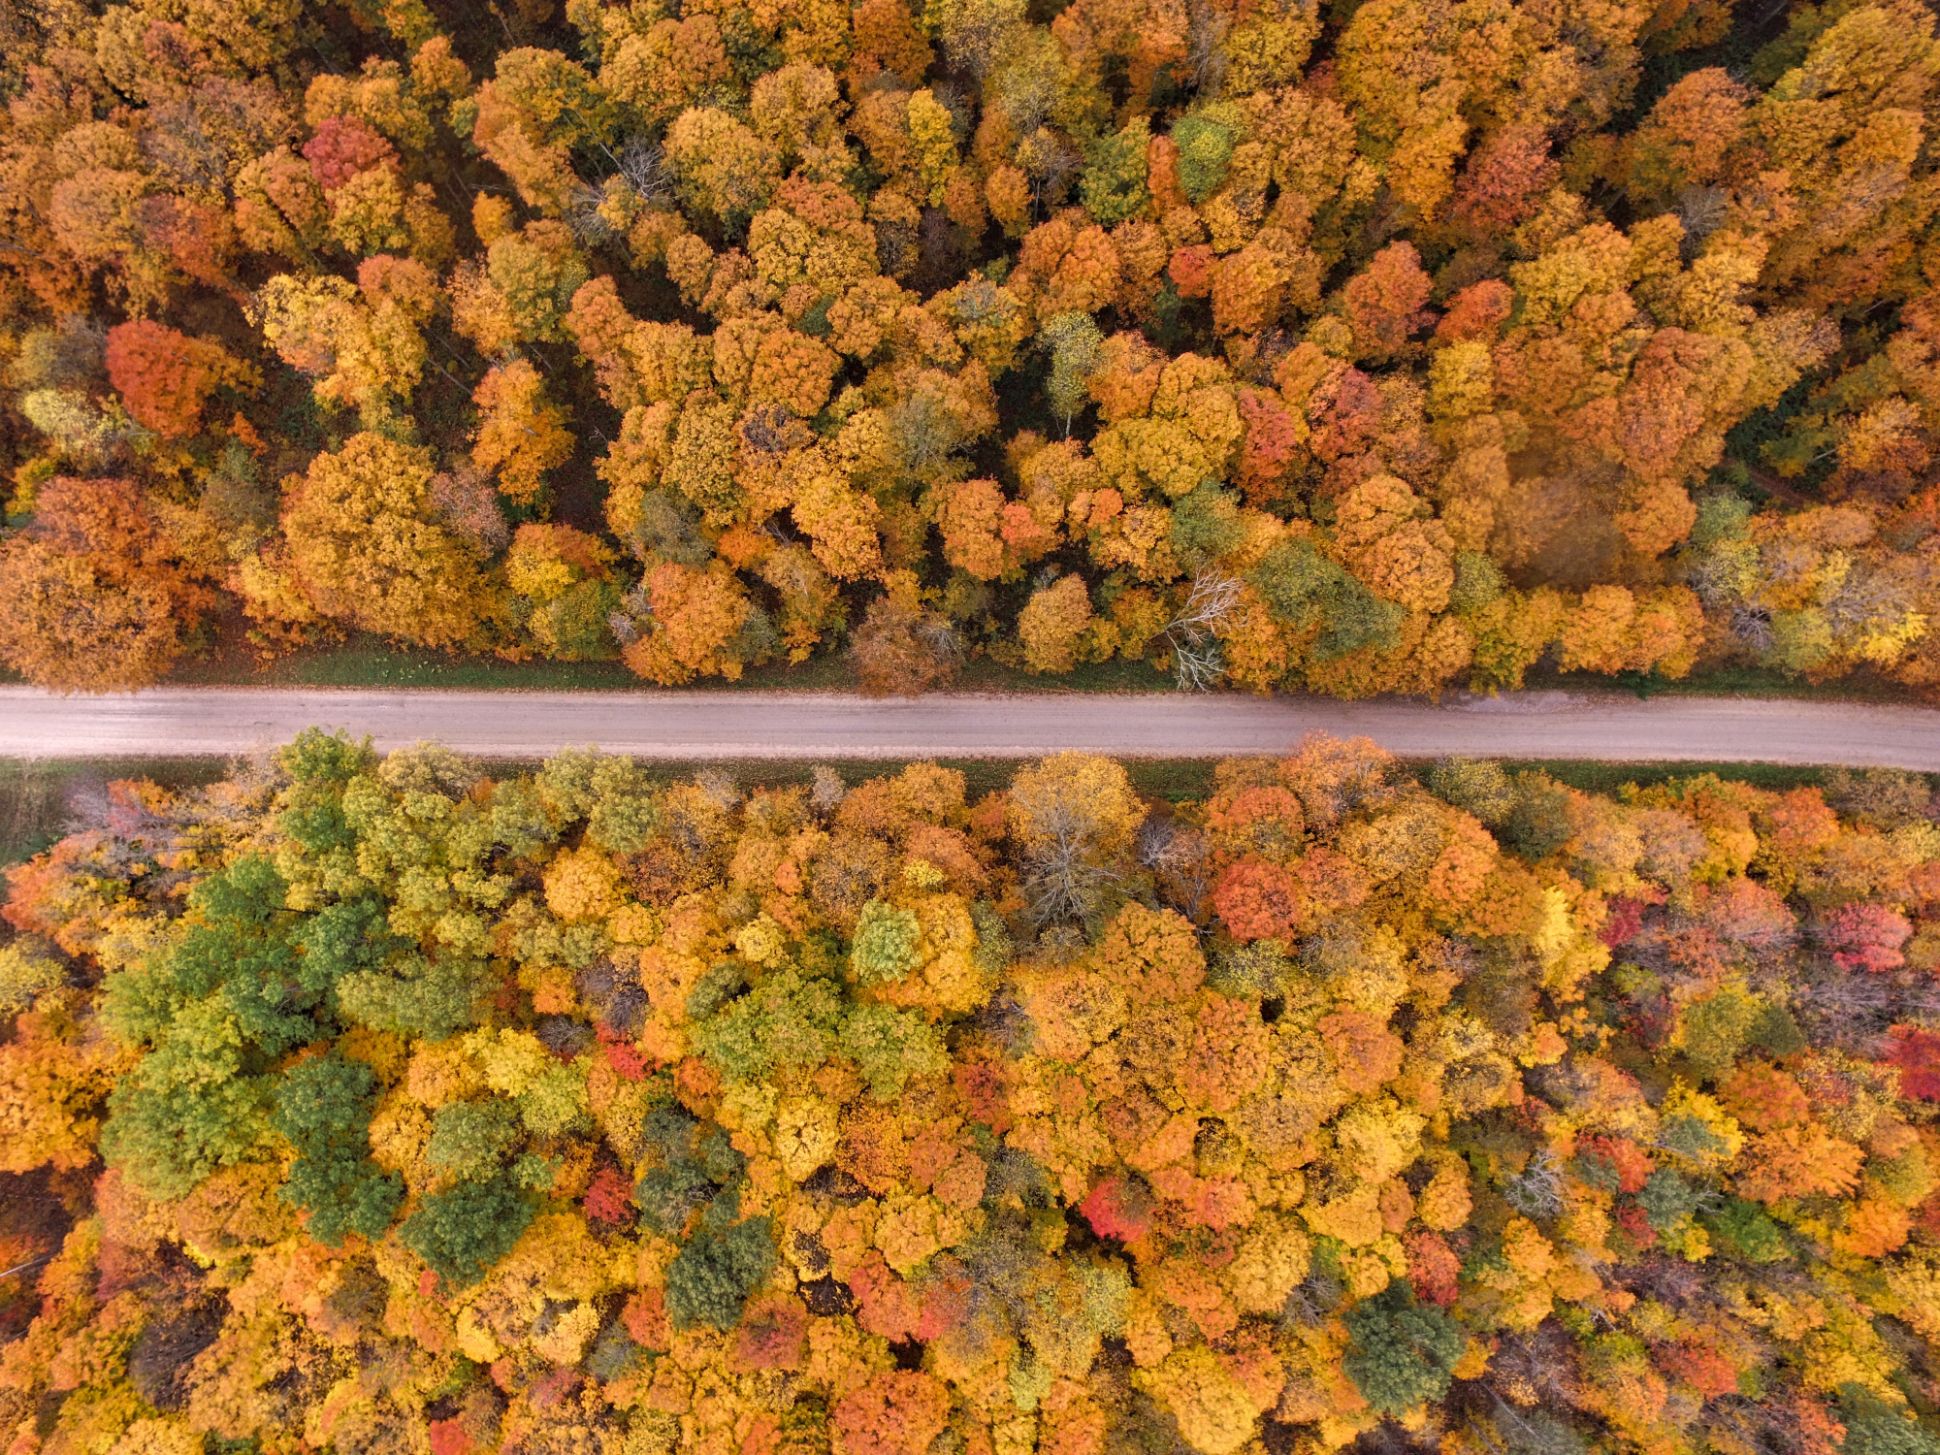 Aerial view of road surrounded by fall-colored trees.